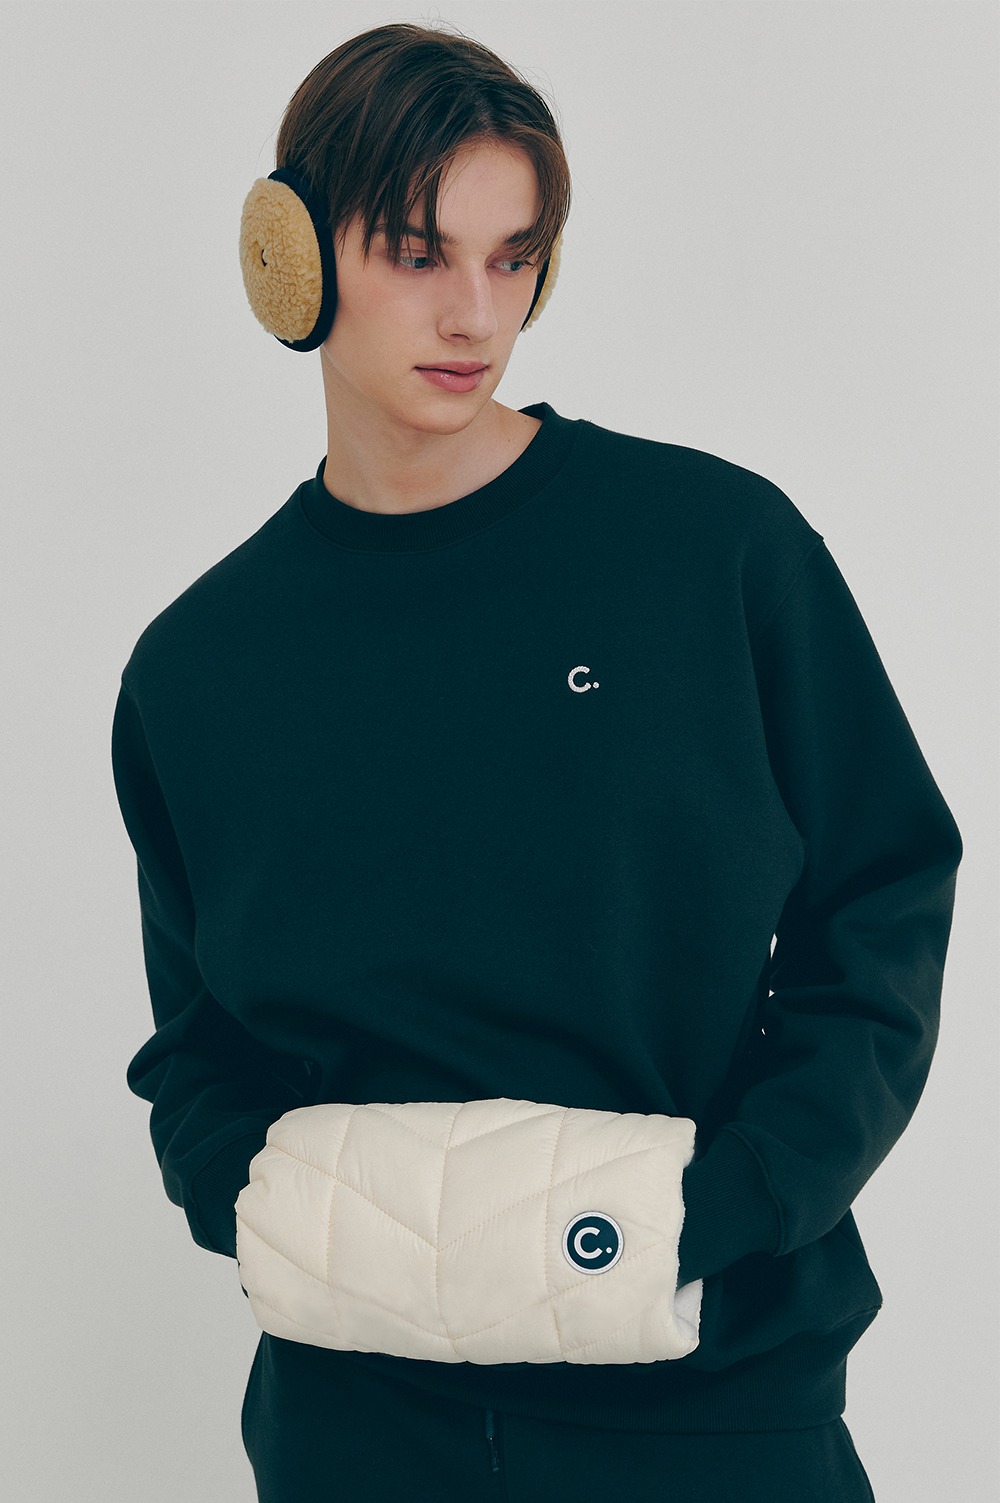 clove - [FW21 clove] Quilted Body Bag (Ivory)